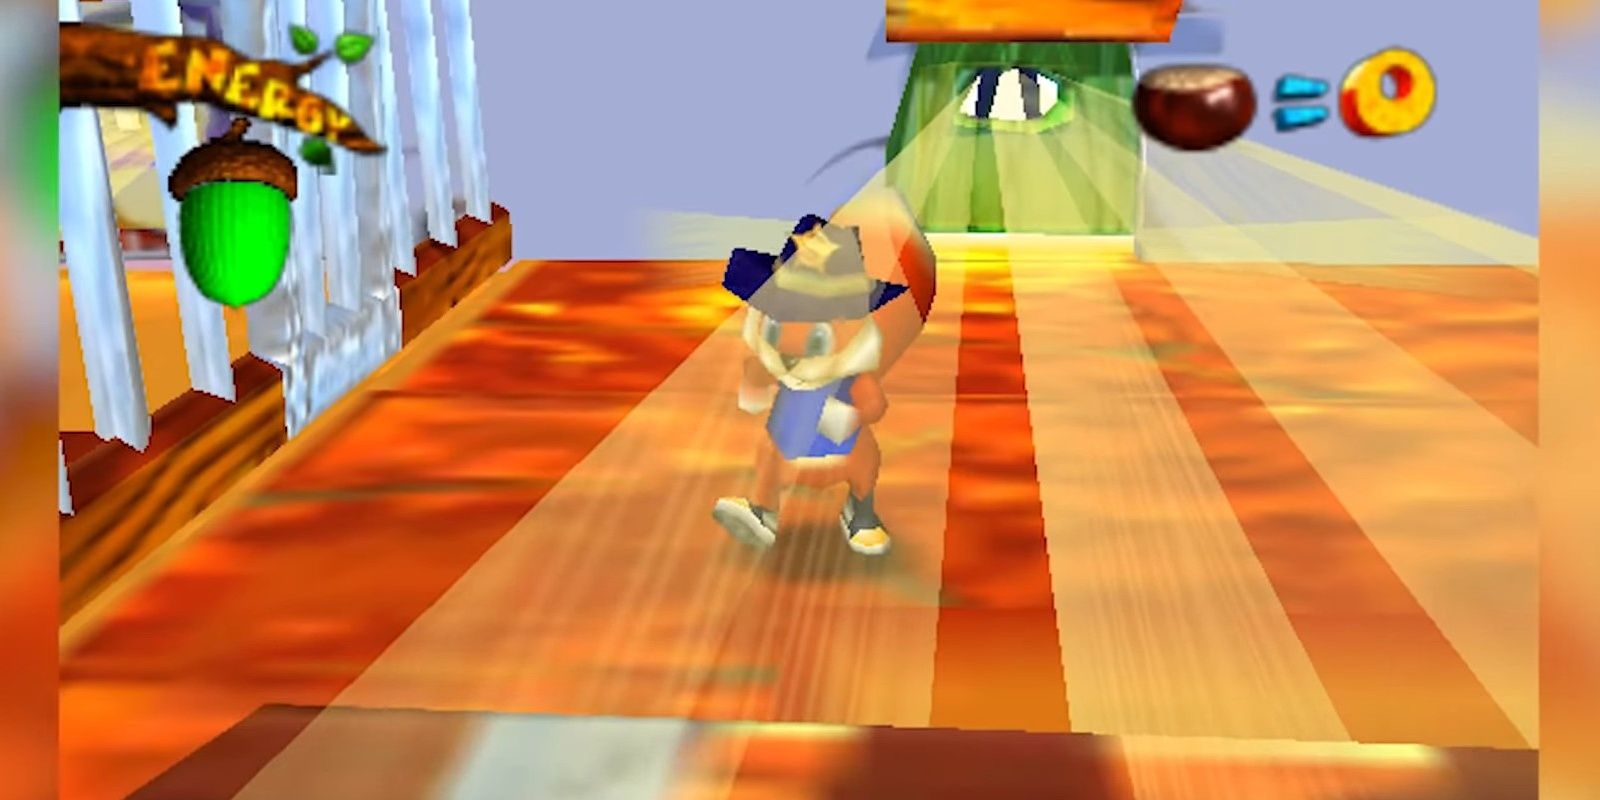 Sheriff Conker on duty during the early version of Conker's Bad Fur Day.